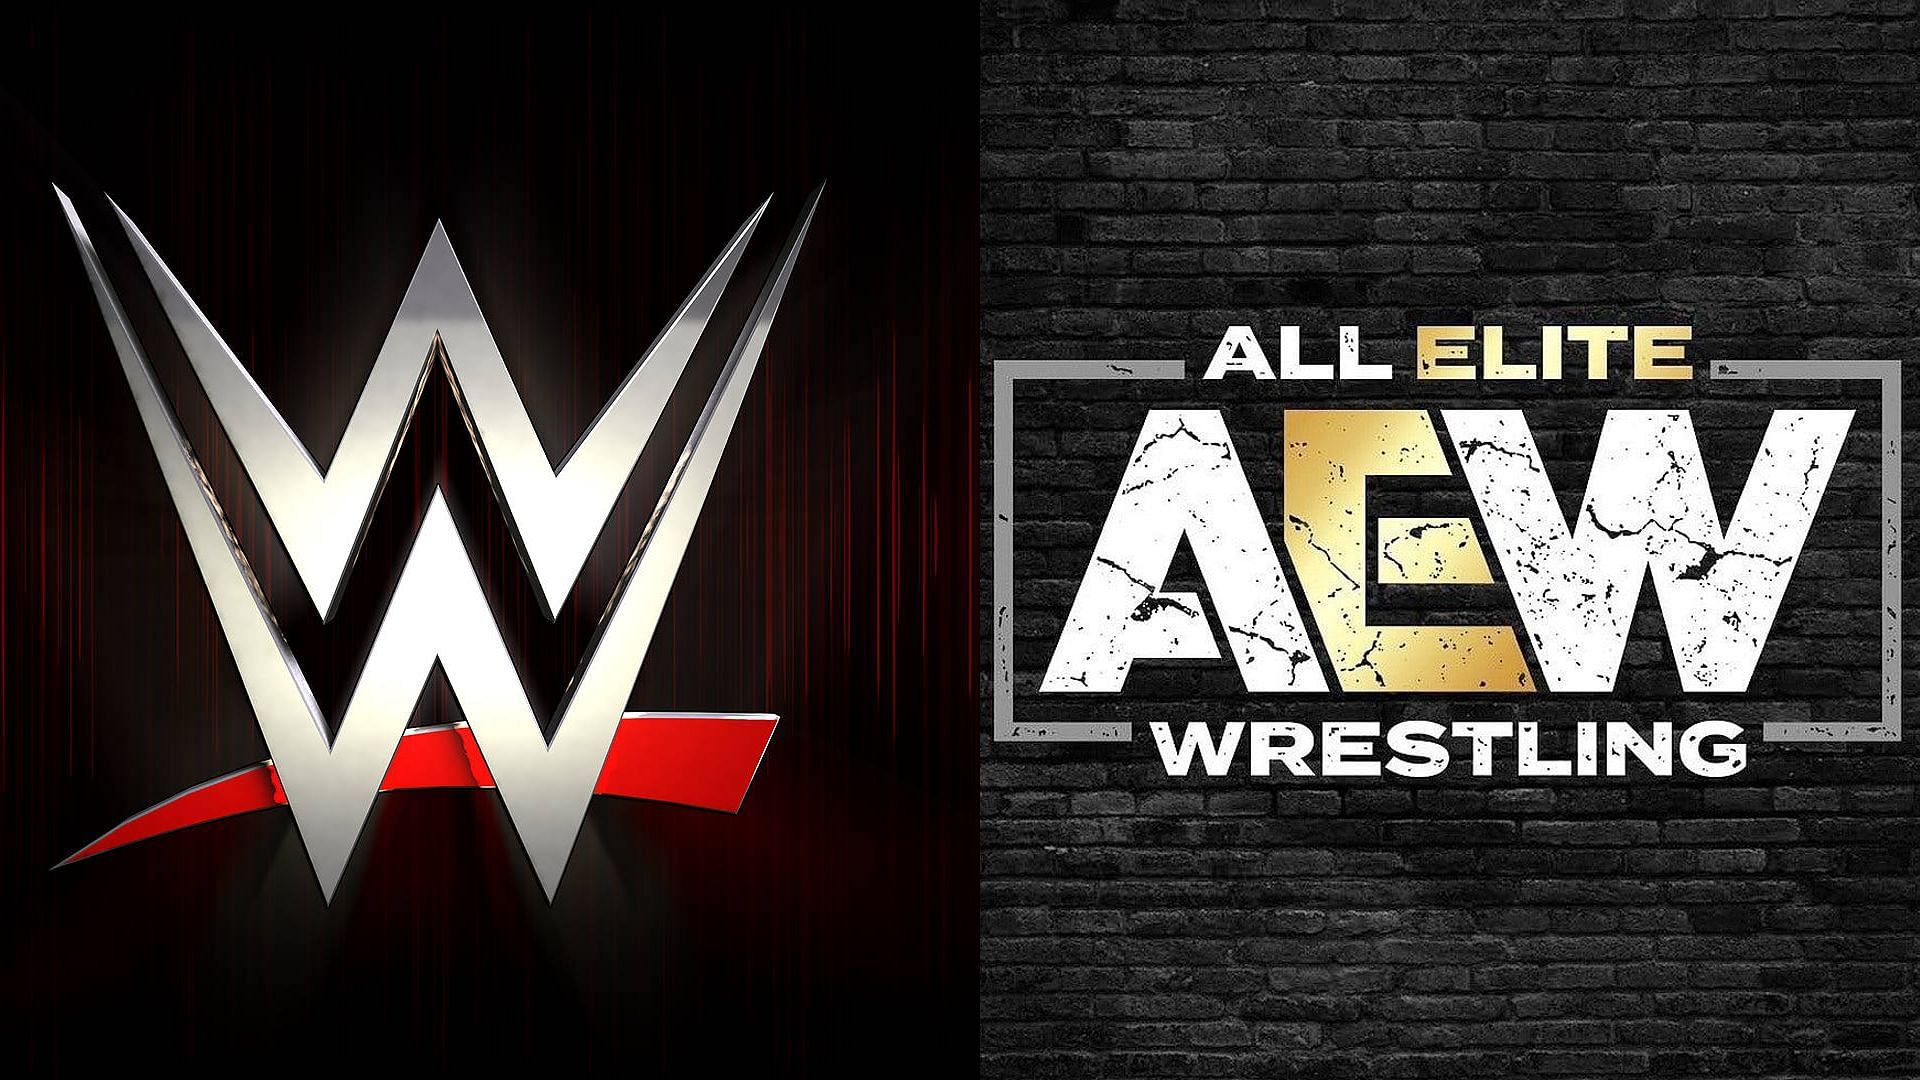 Former WWE star appeared on AEW programming after missing extended time